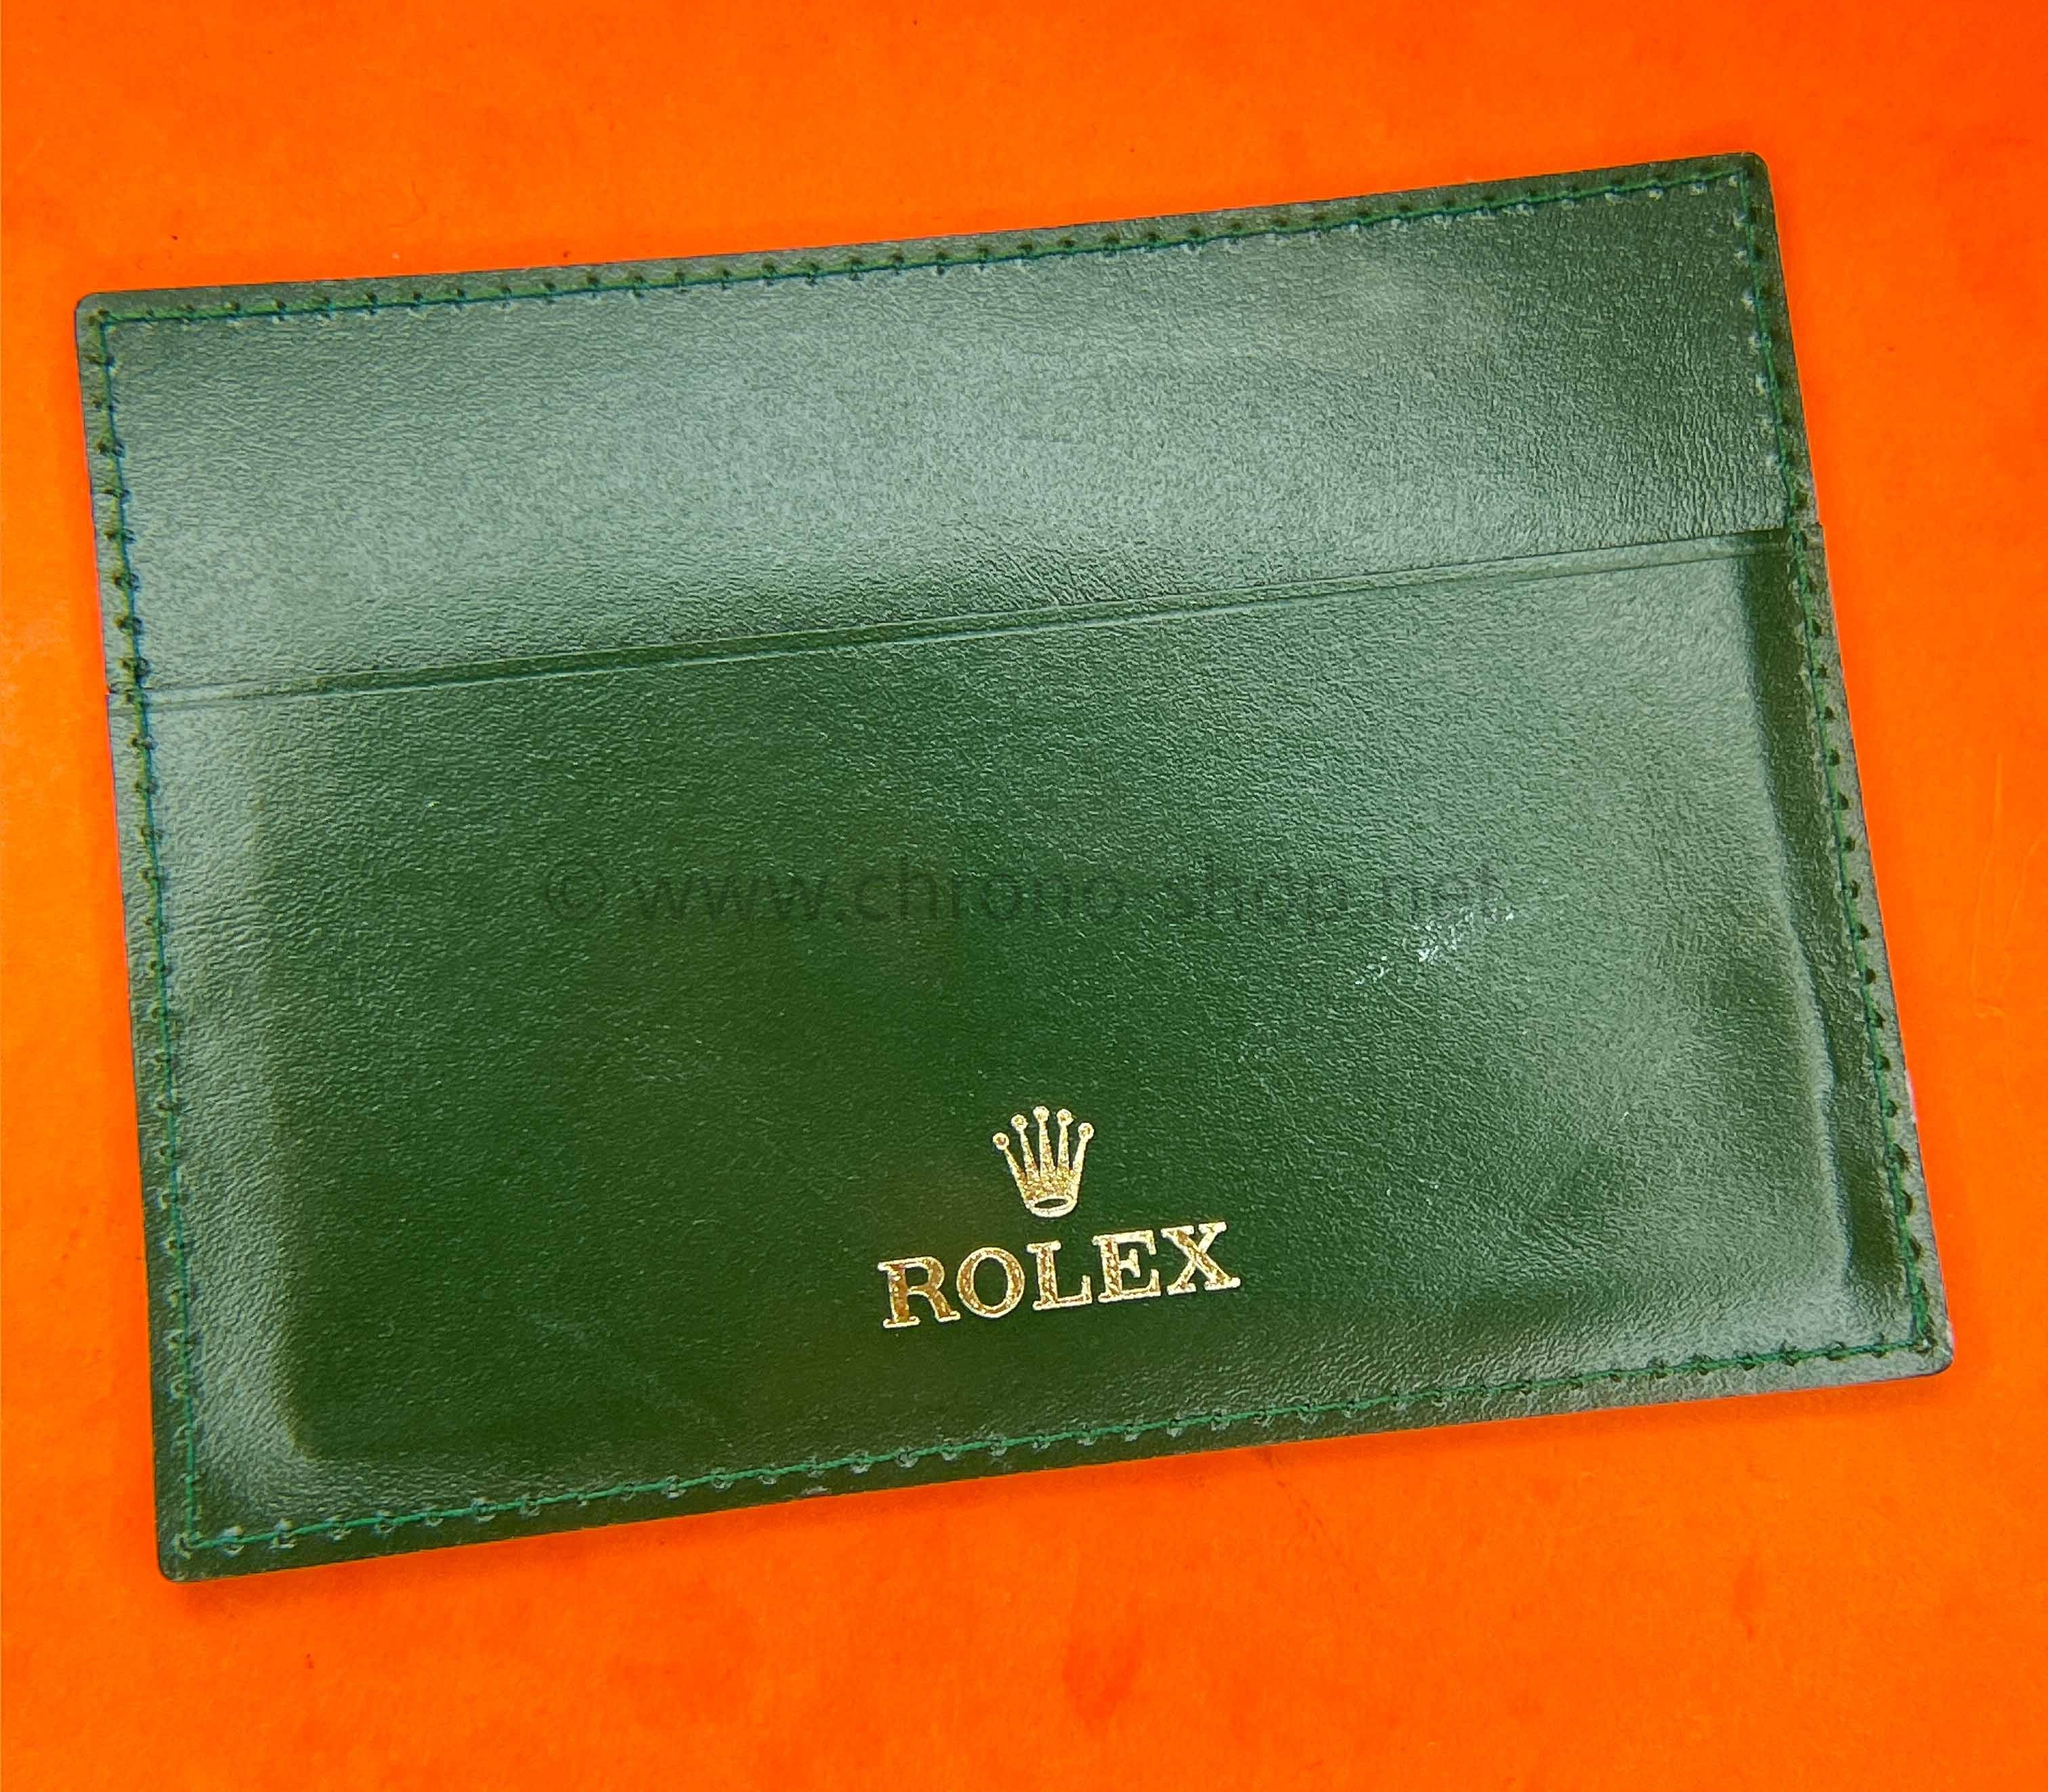 Rolex 2009-2013 Exclusive Collectible smooth leather Green guarantee warranty Card Holder paper documents watches guarantee